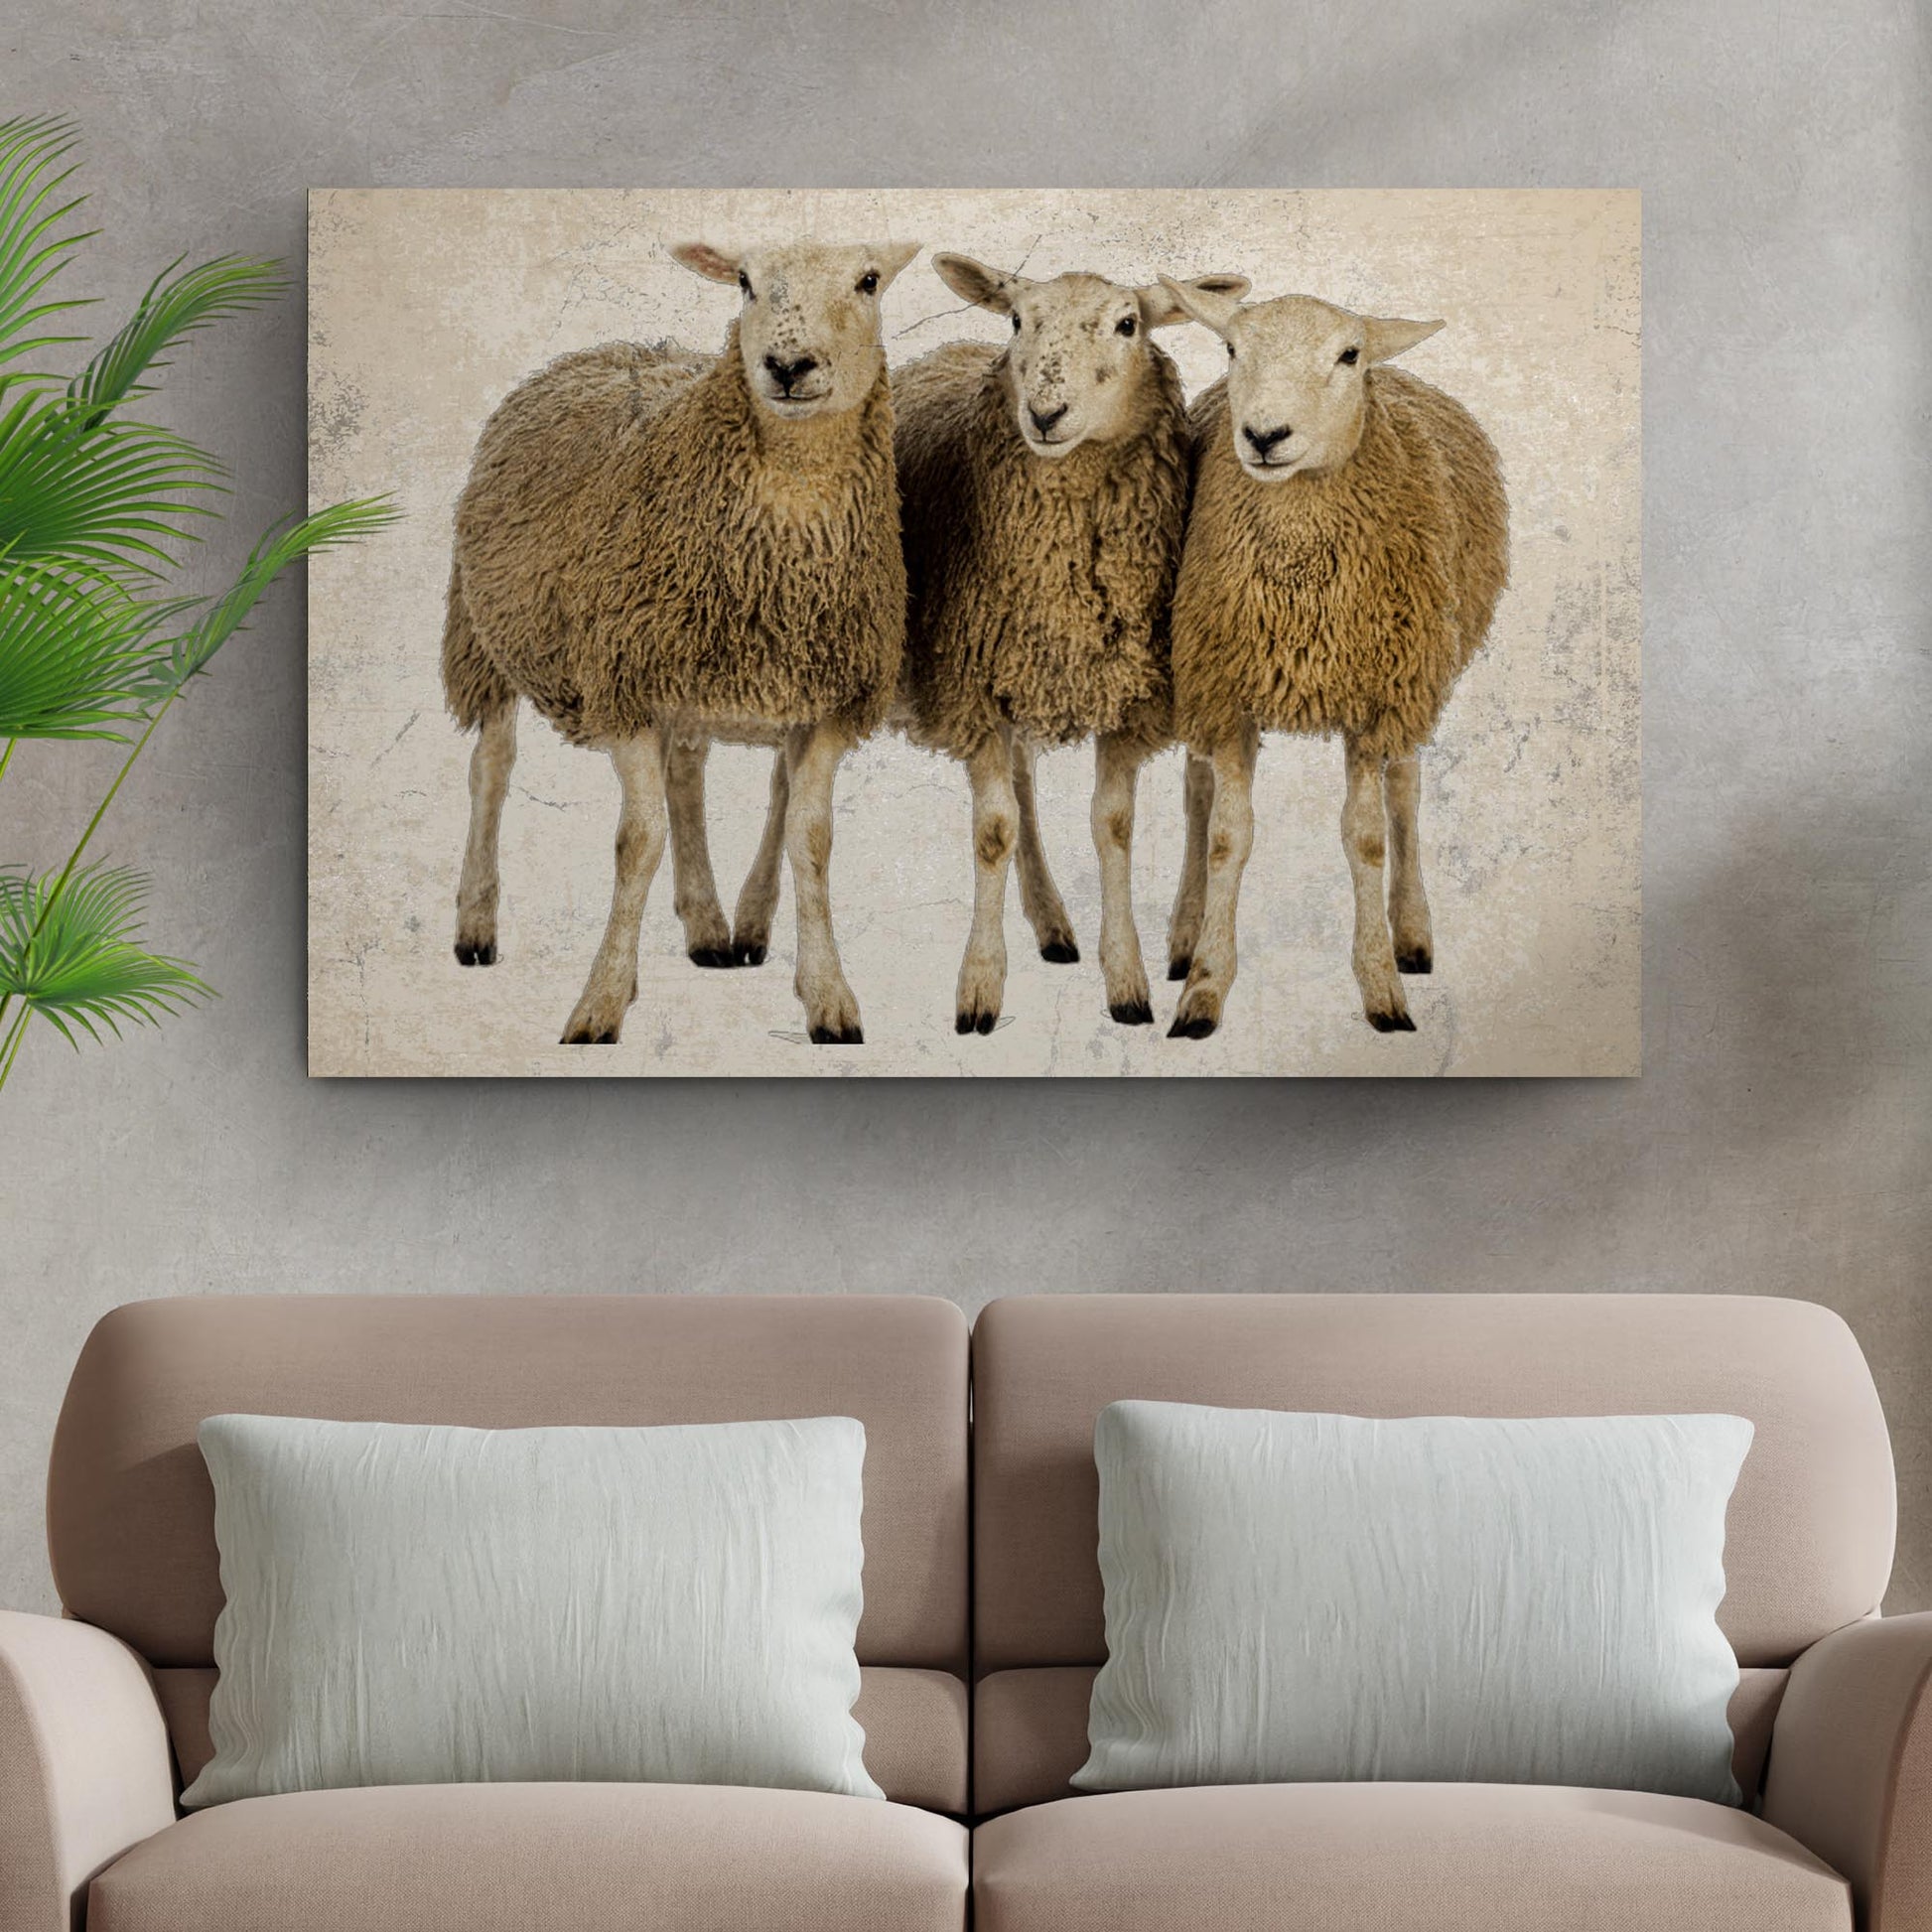 Rustic Sheep Herd Canvas Wall Art - Image by Tailored Canvases